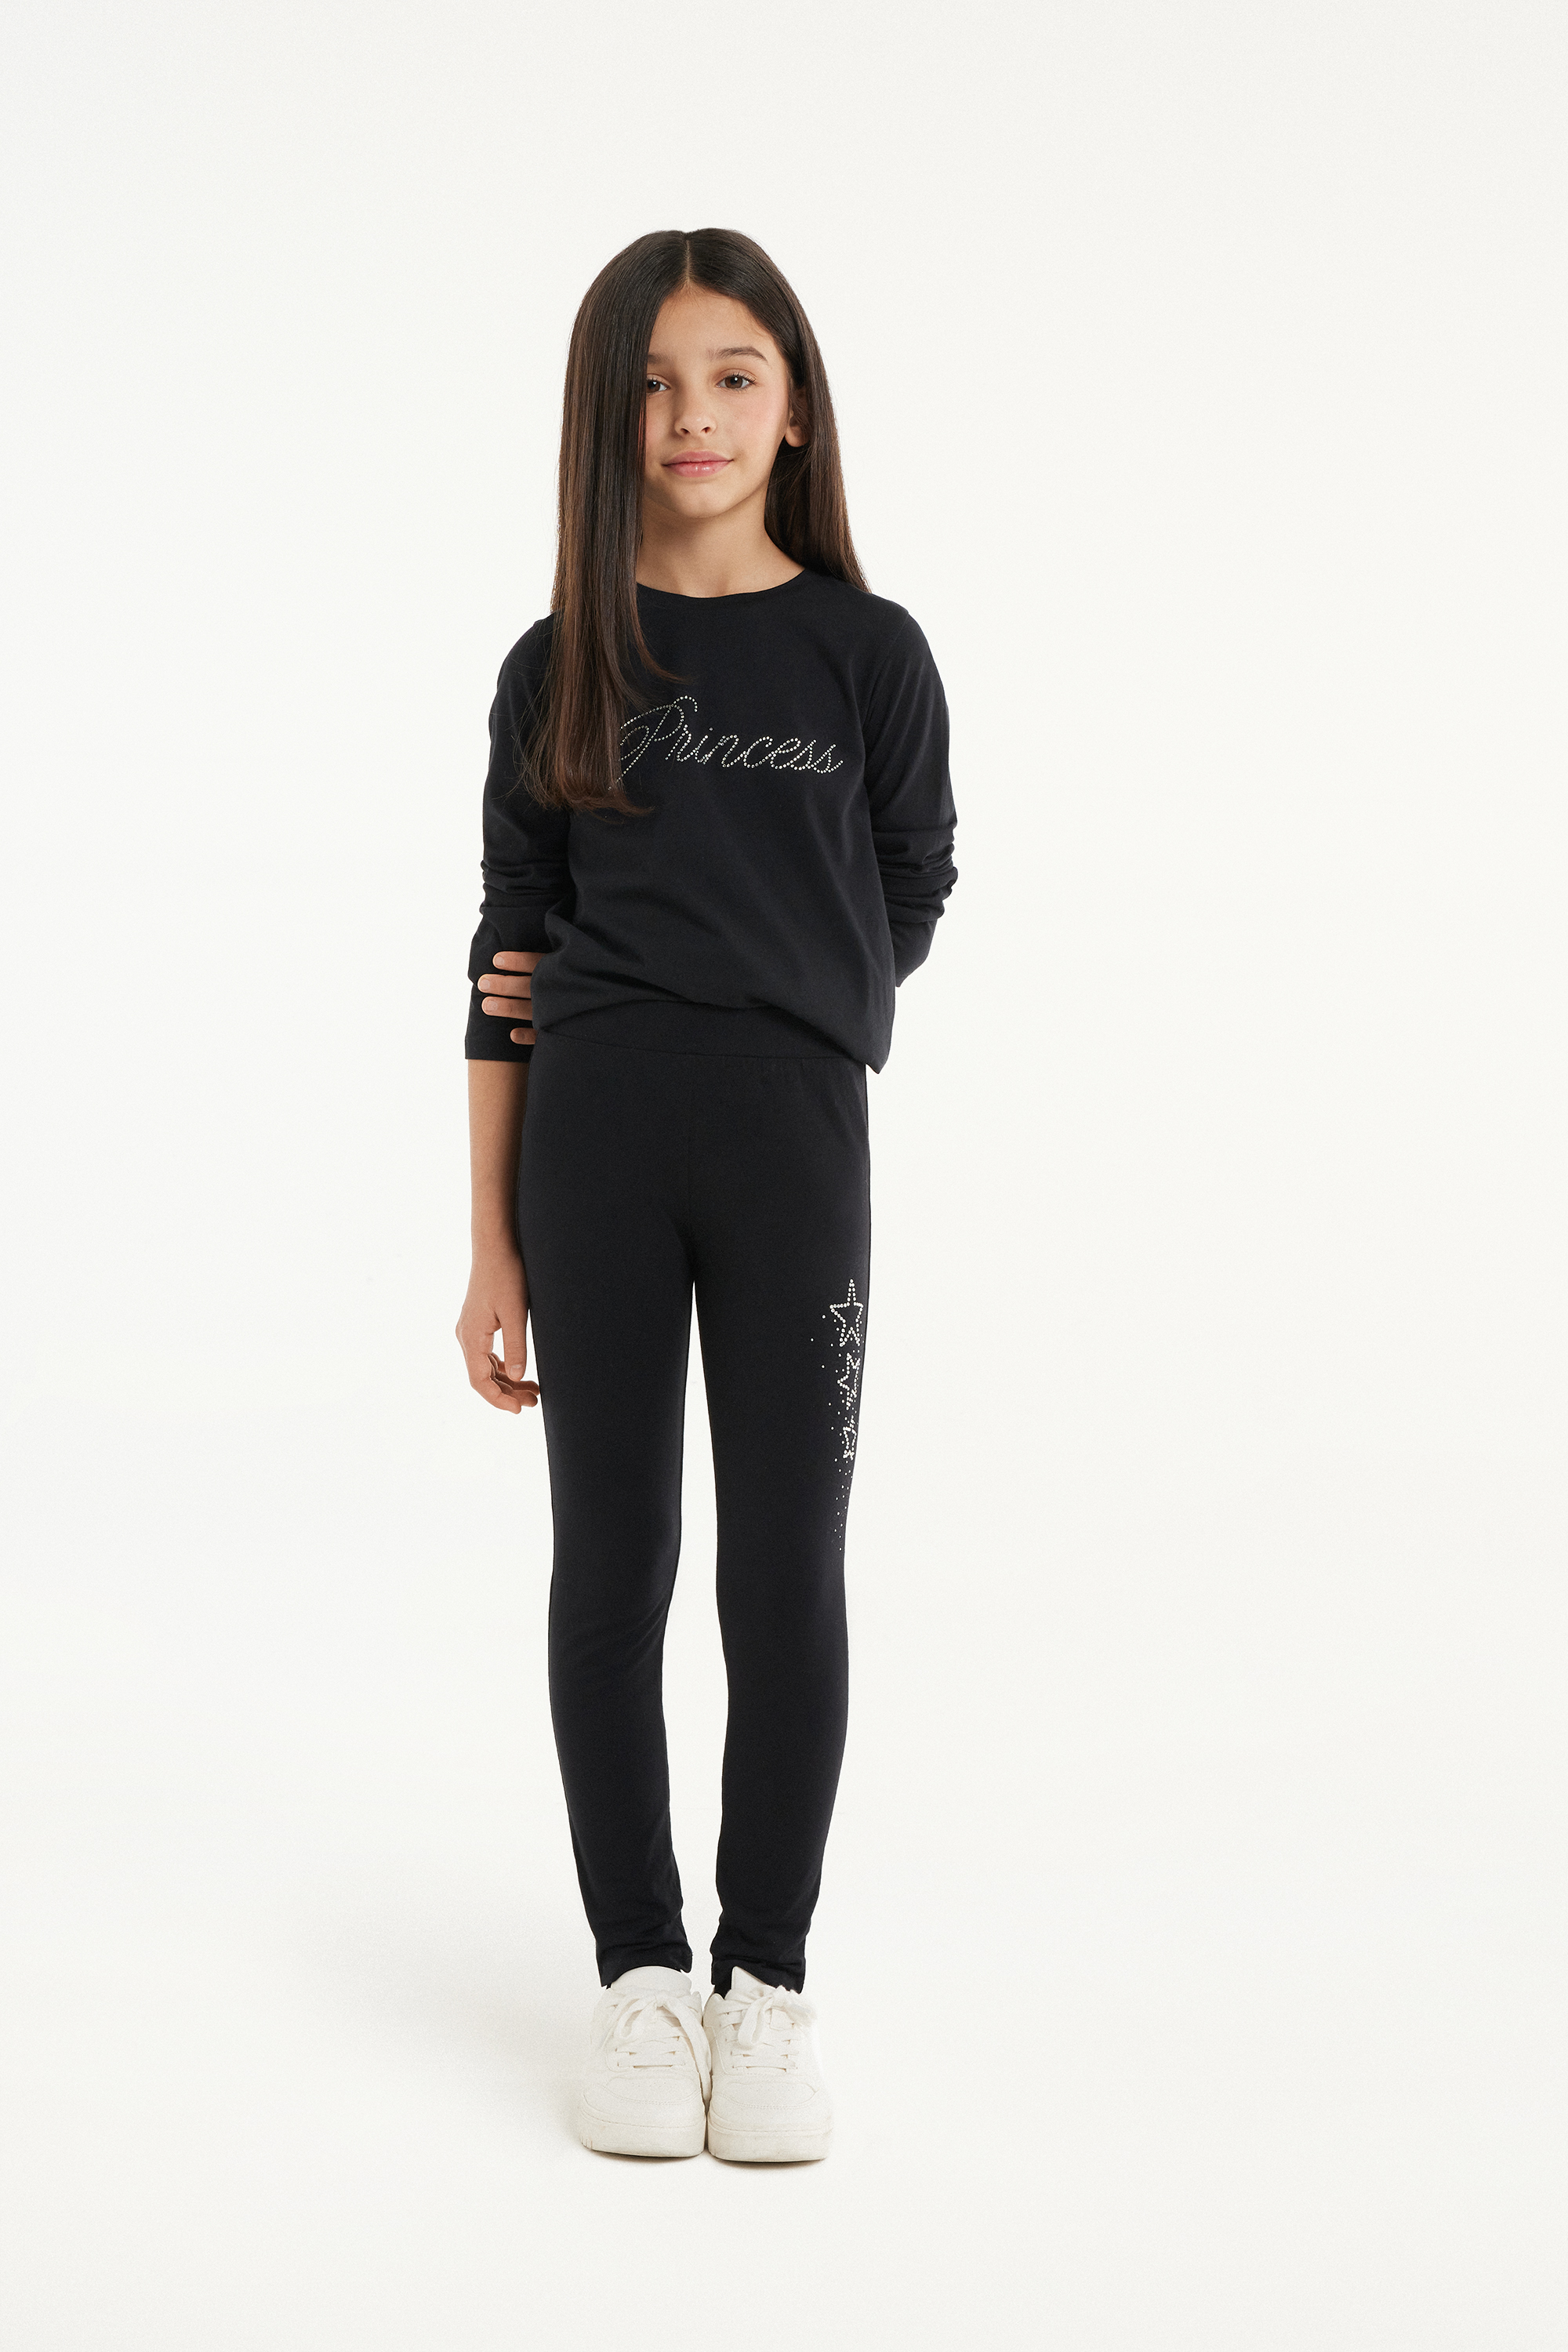 Long Sleeve Cotton Top with Rounded Neck and Rhinestone Lettering